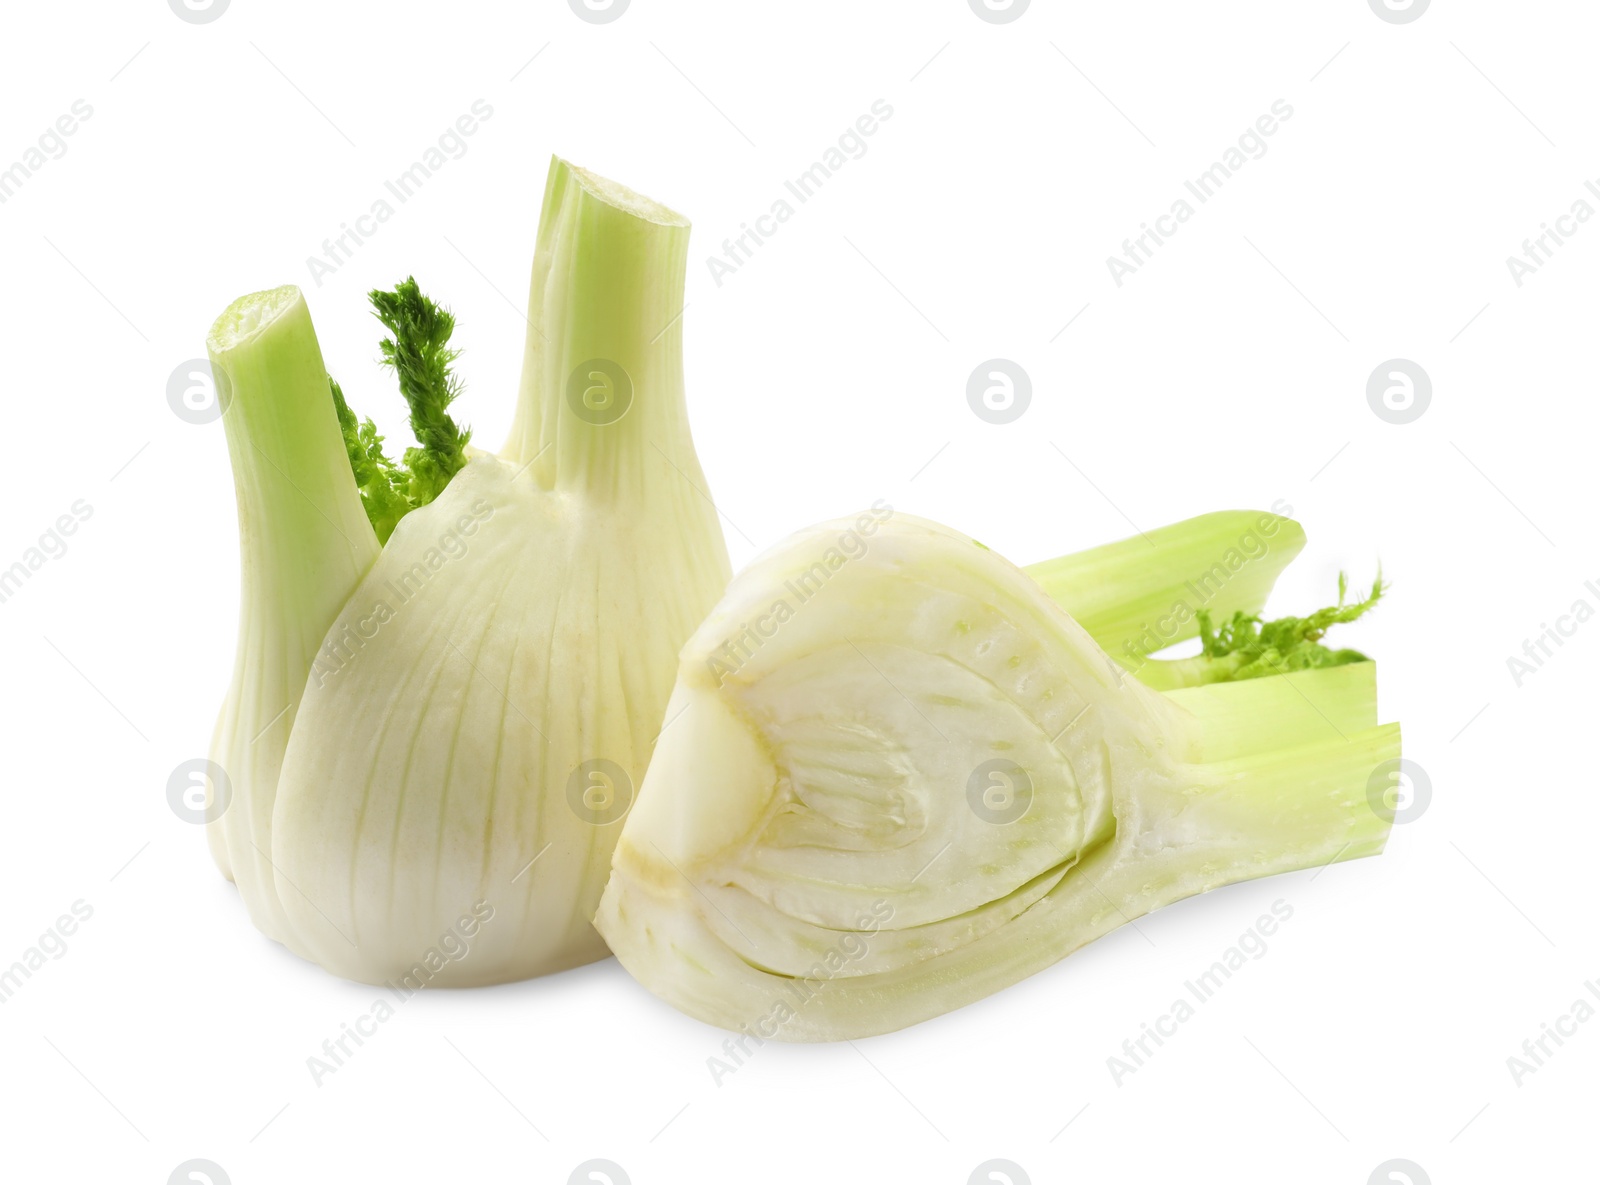 Photo of Whole and cut fennel bulbs isolated on white